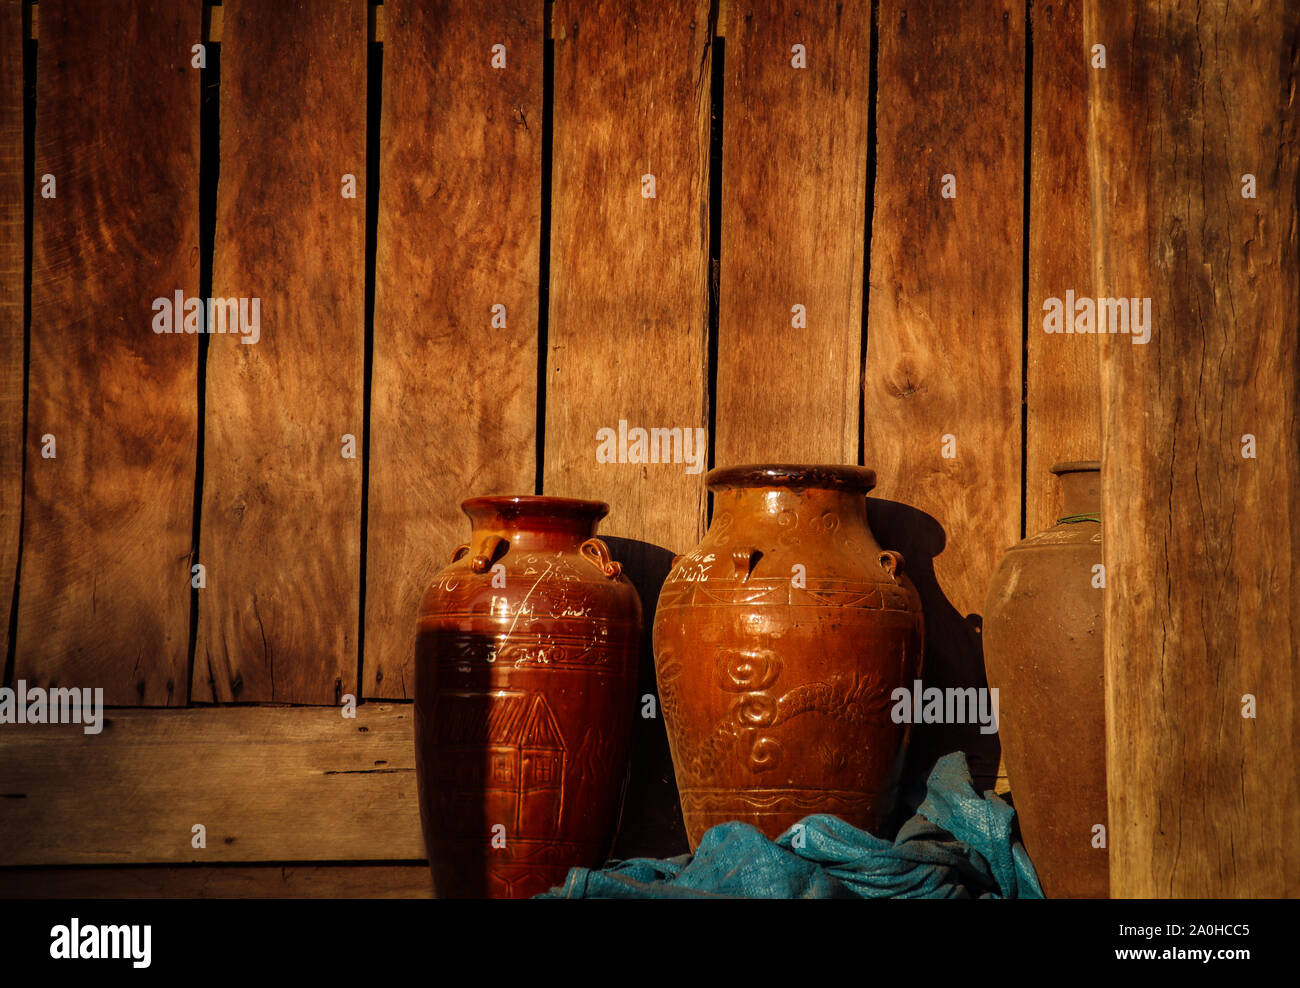 Earthen ware jars that traditionally use by the hmong people as containers for preserving food, shows the village life and culture in Lien son Vietnam Stock Photo